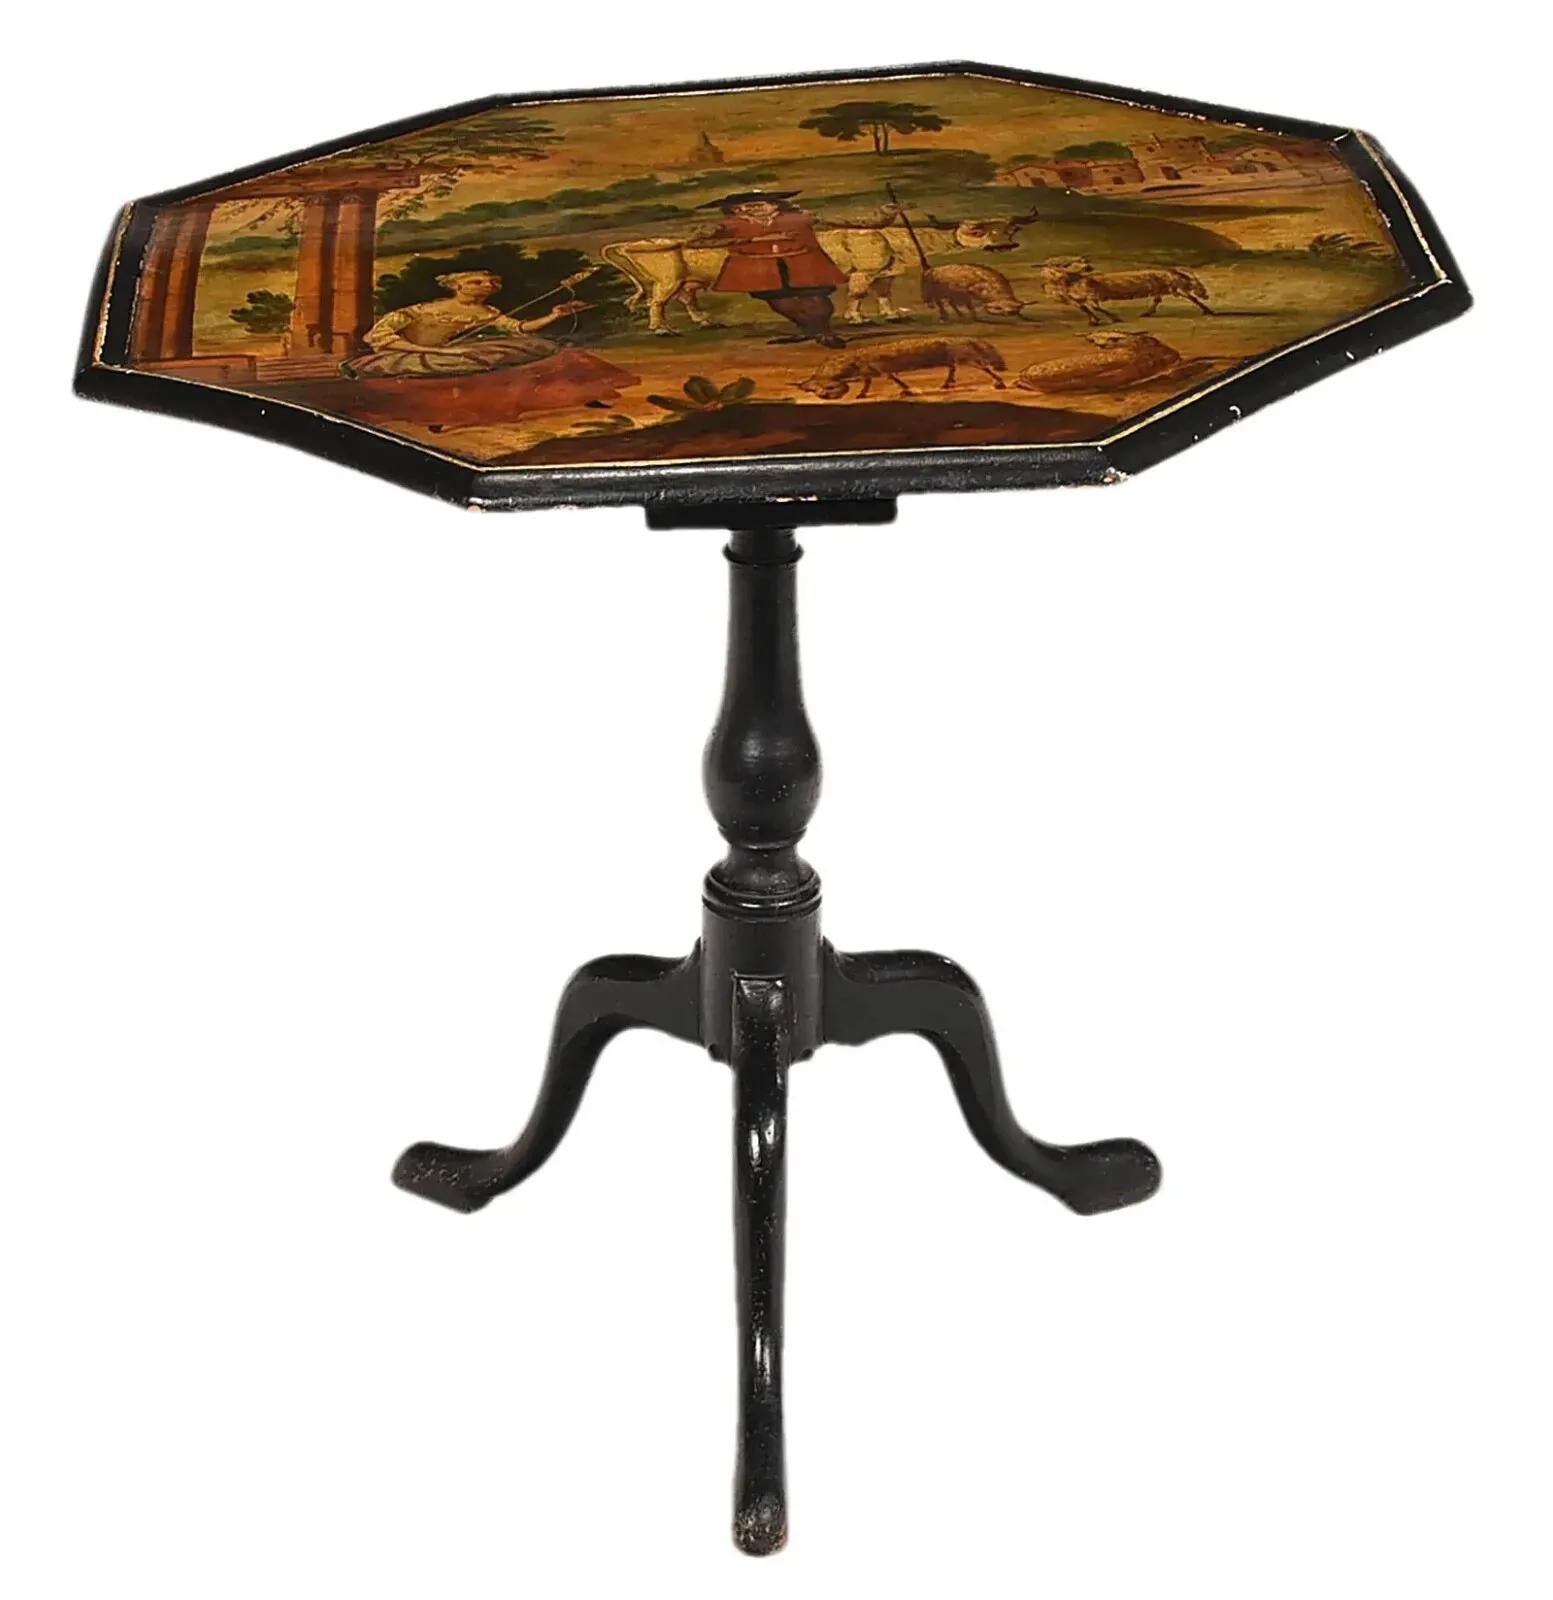 Other 1700's Antique George III Style, Paint Decorated, OctagonalTea, Tilt Top Table!! For Sale